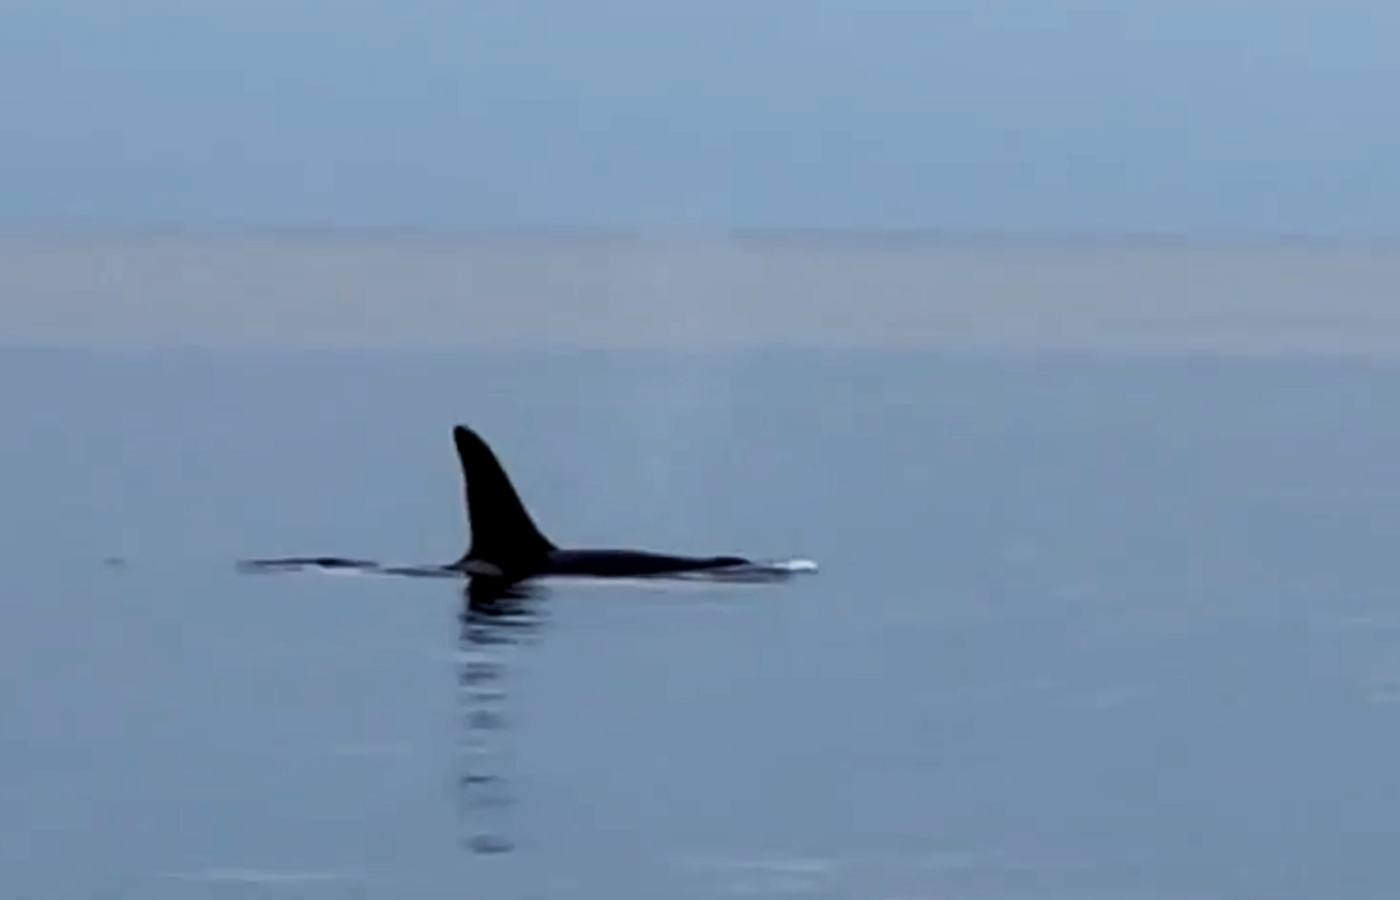 A marine guide captured the moment a killer whale leapt into the air off the coast of Mull.